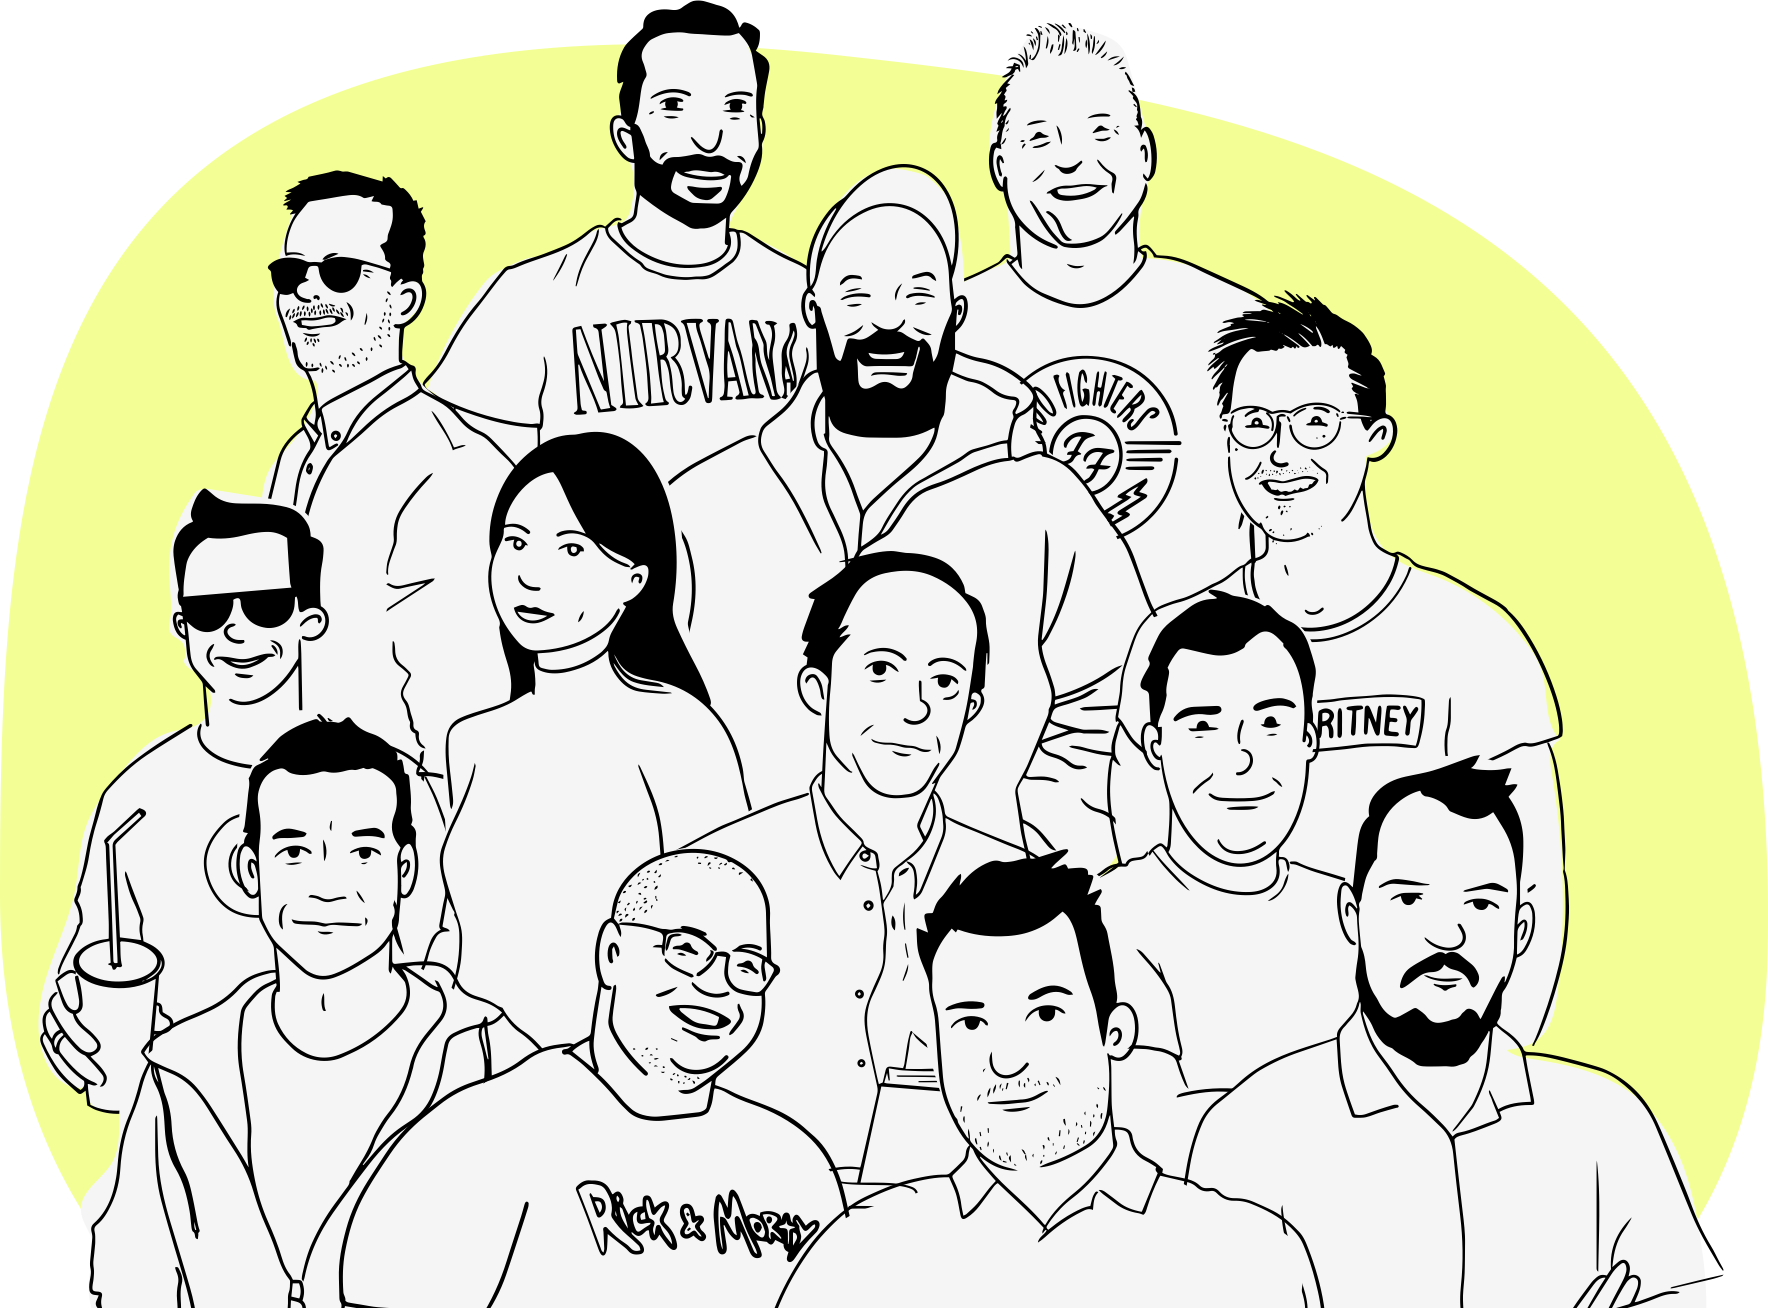 A cartoon rendering of the Smpl Team